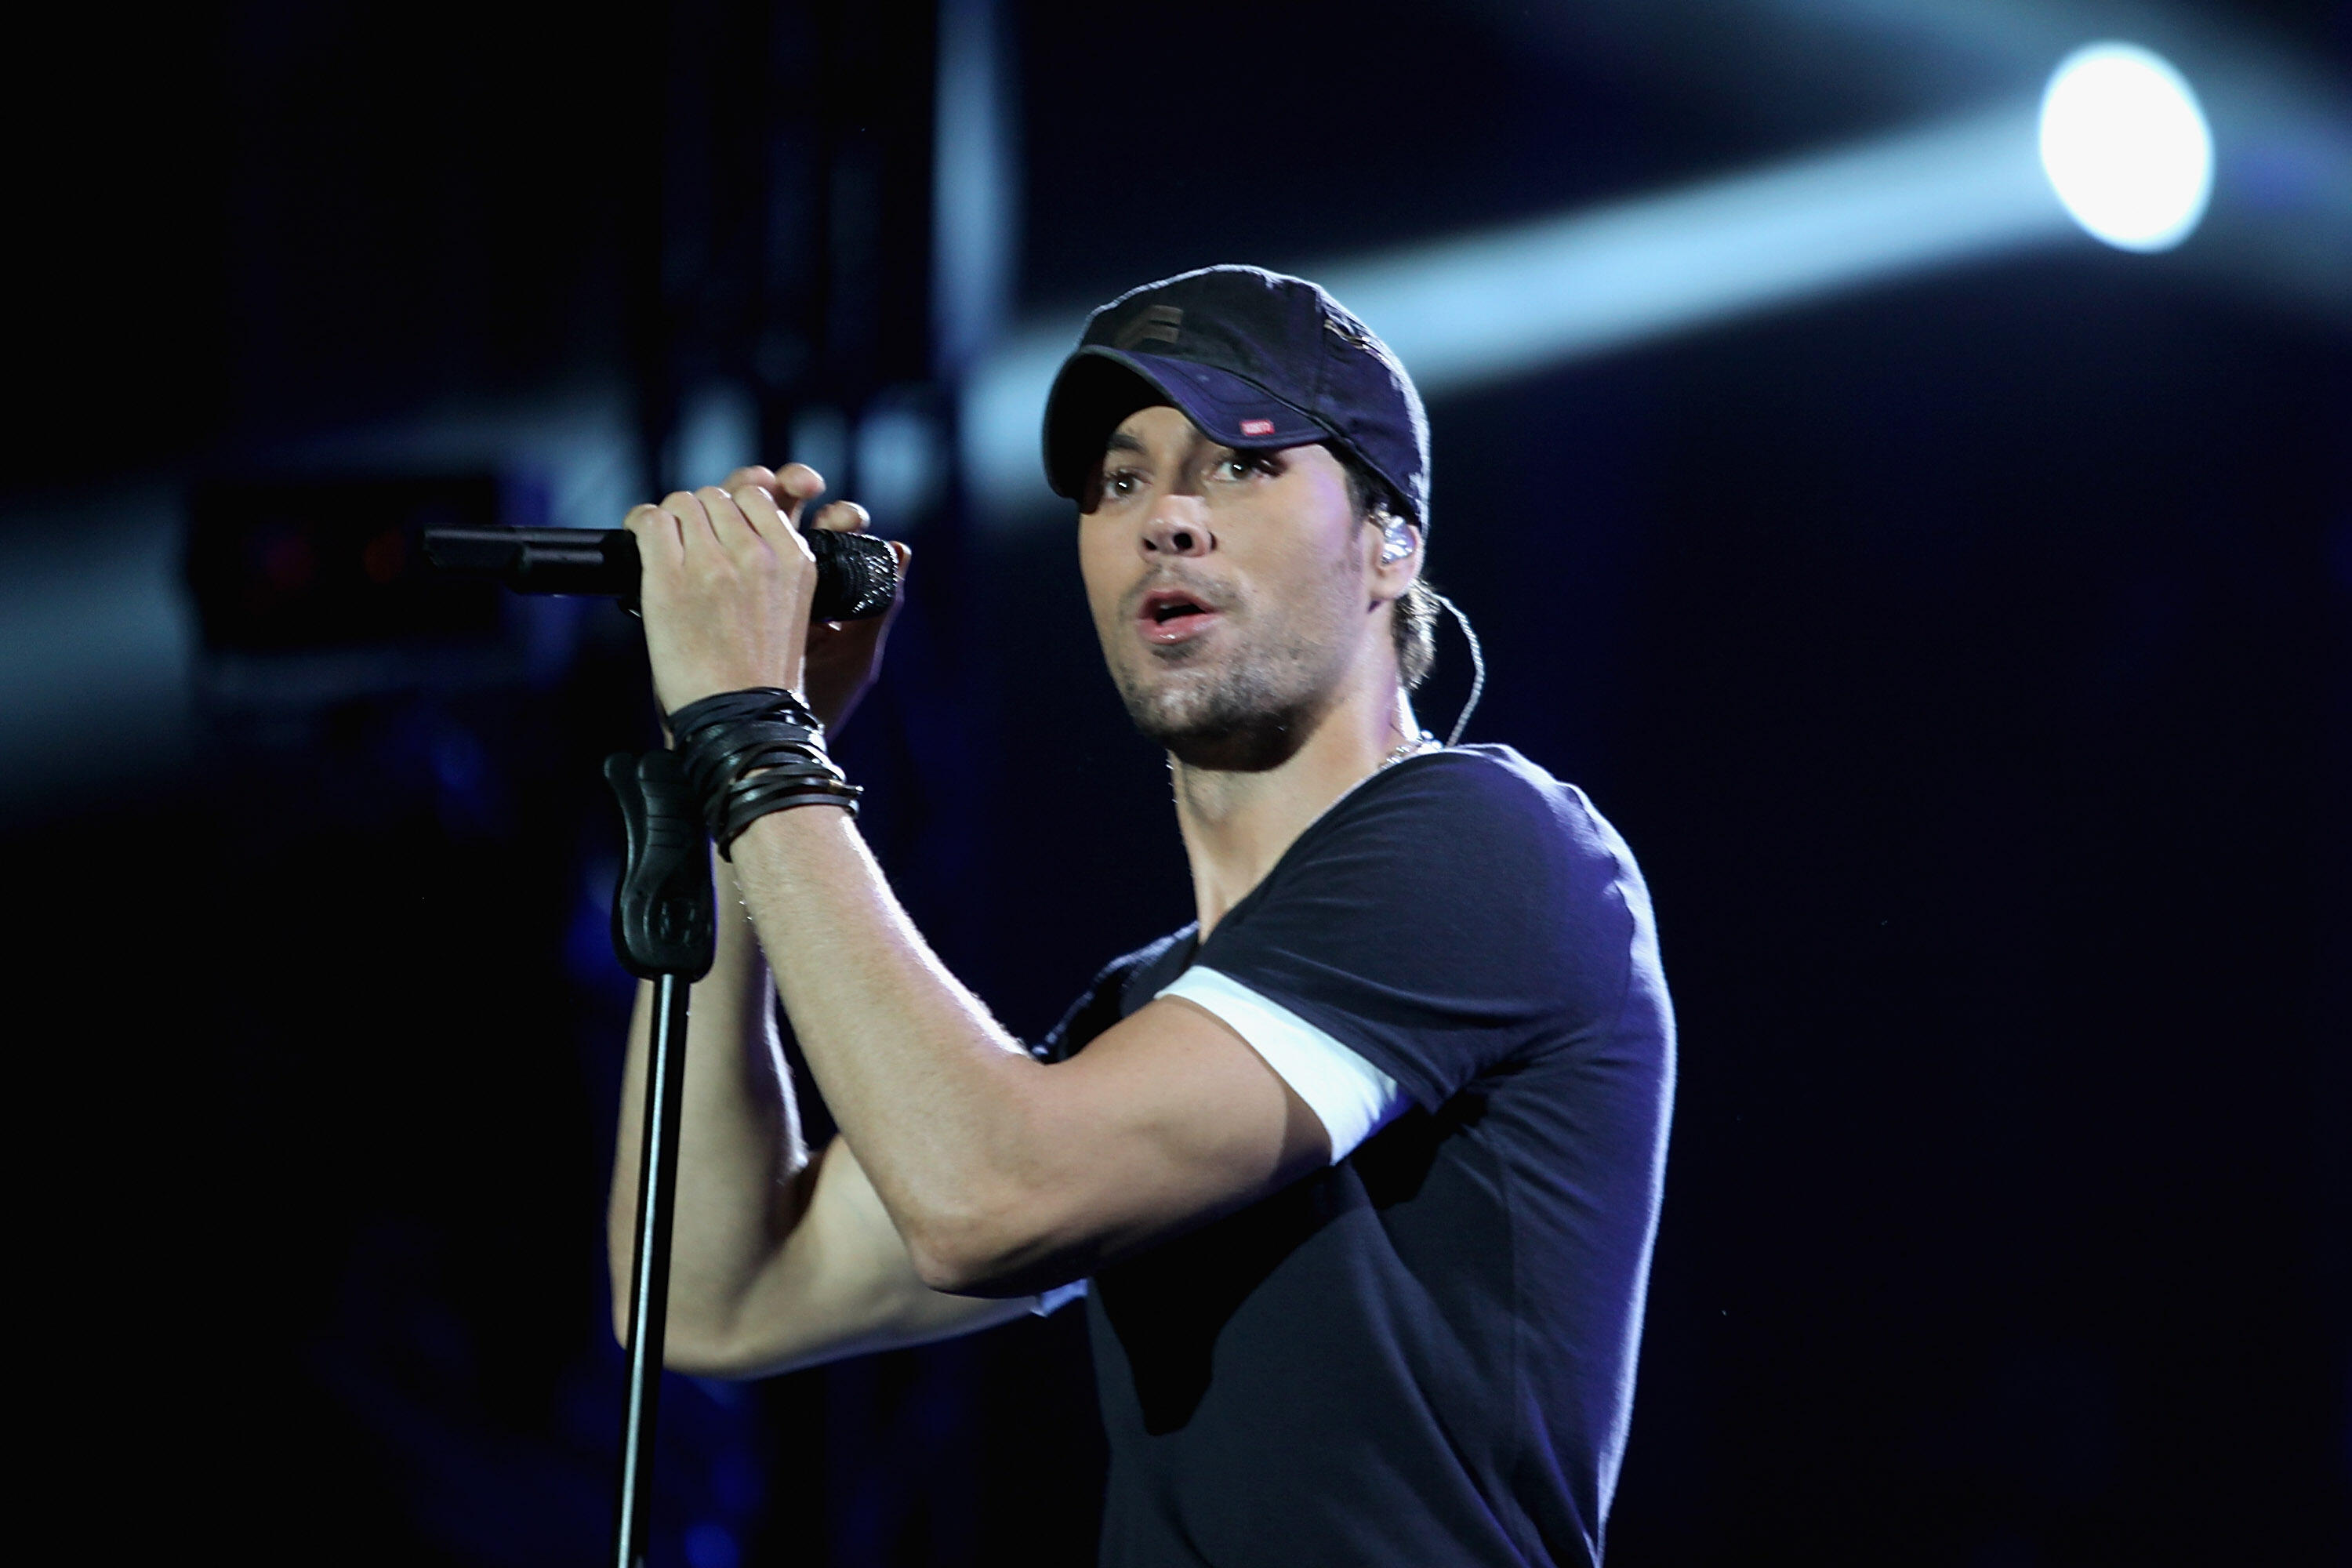 Enrique all songs mp3 download